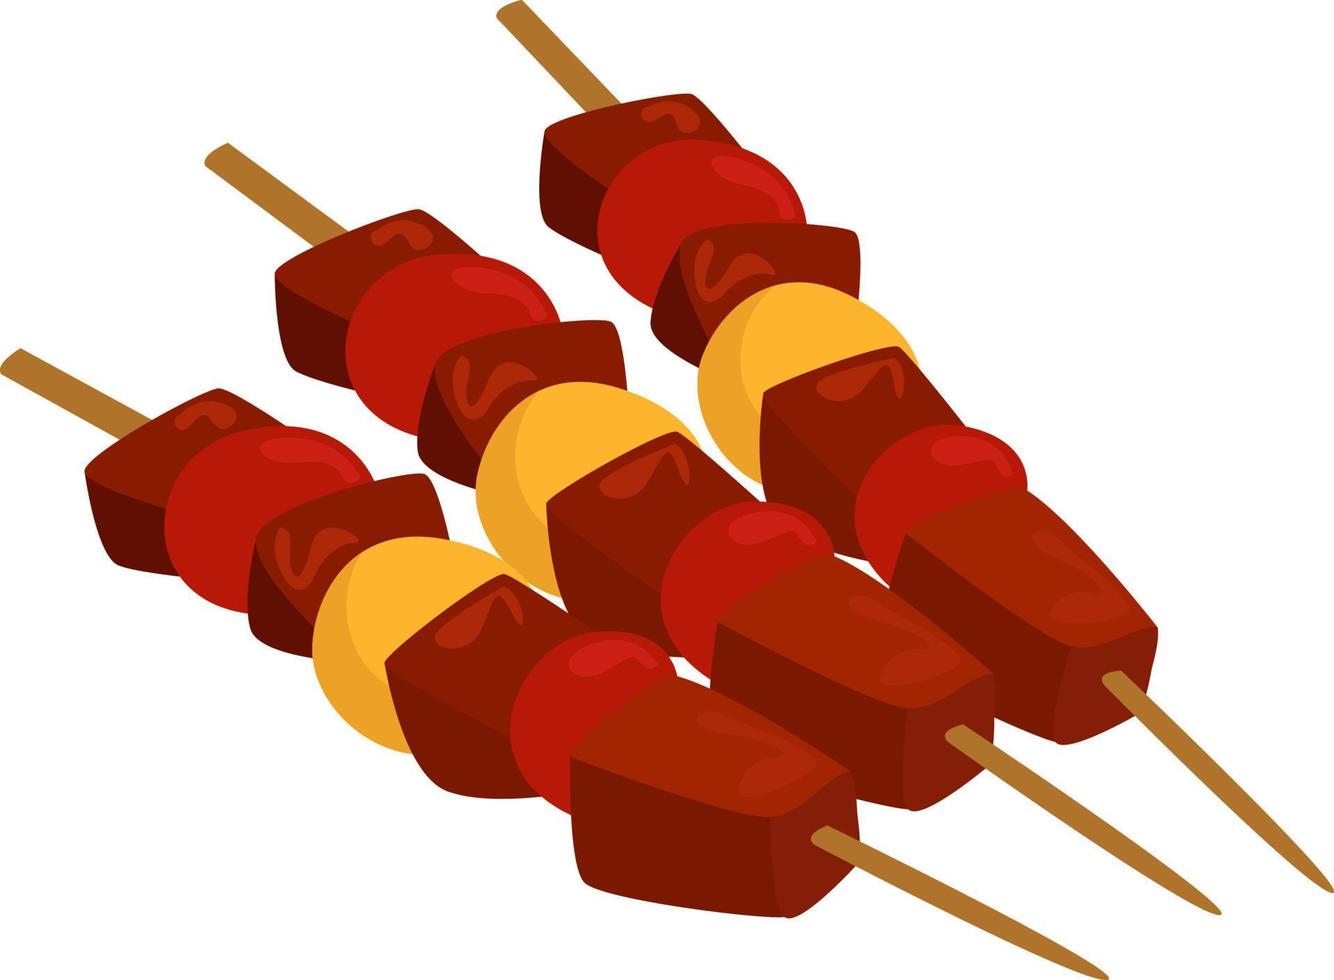 Barbeque on a stick, illustration, vector on white background.